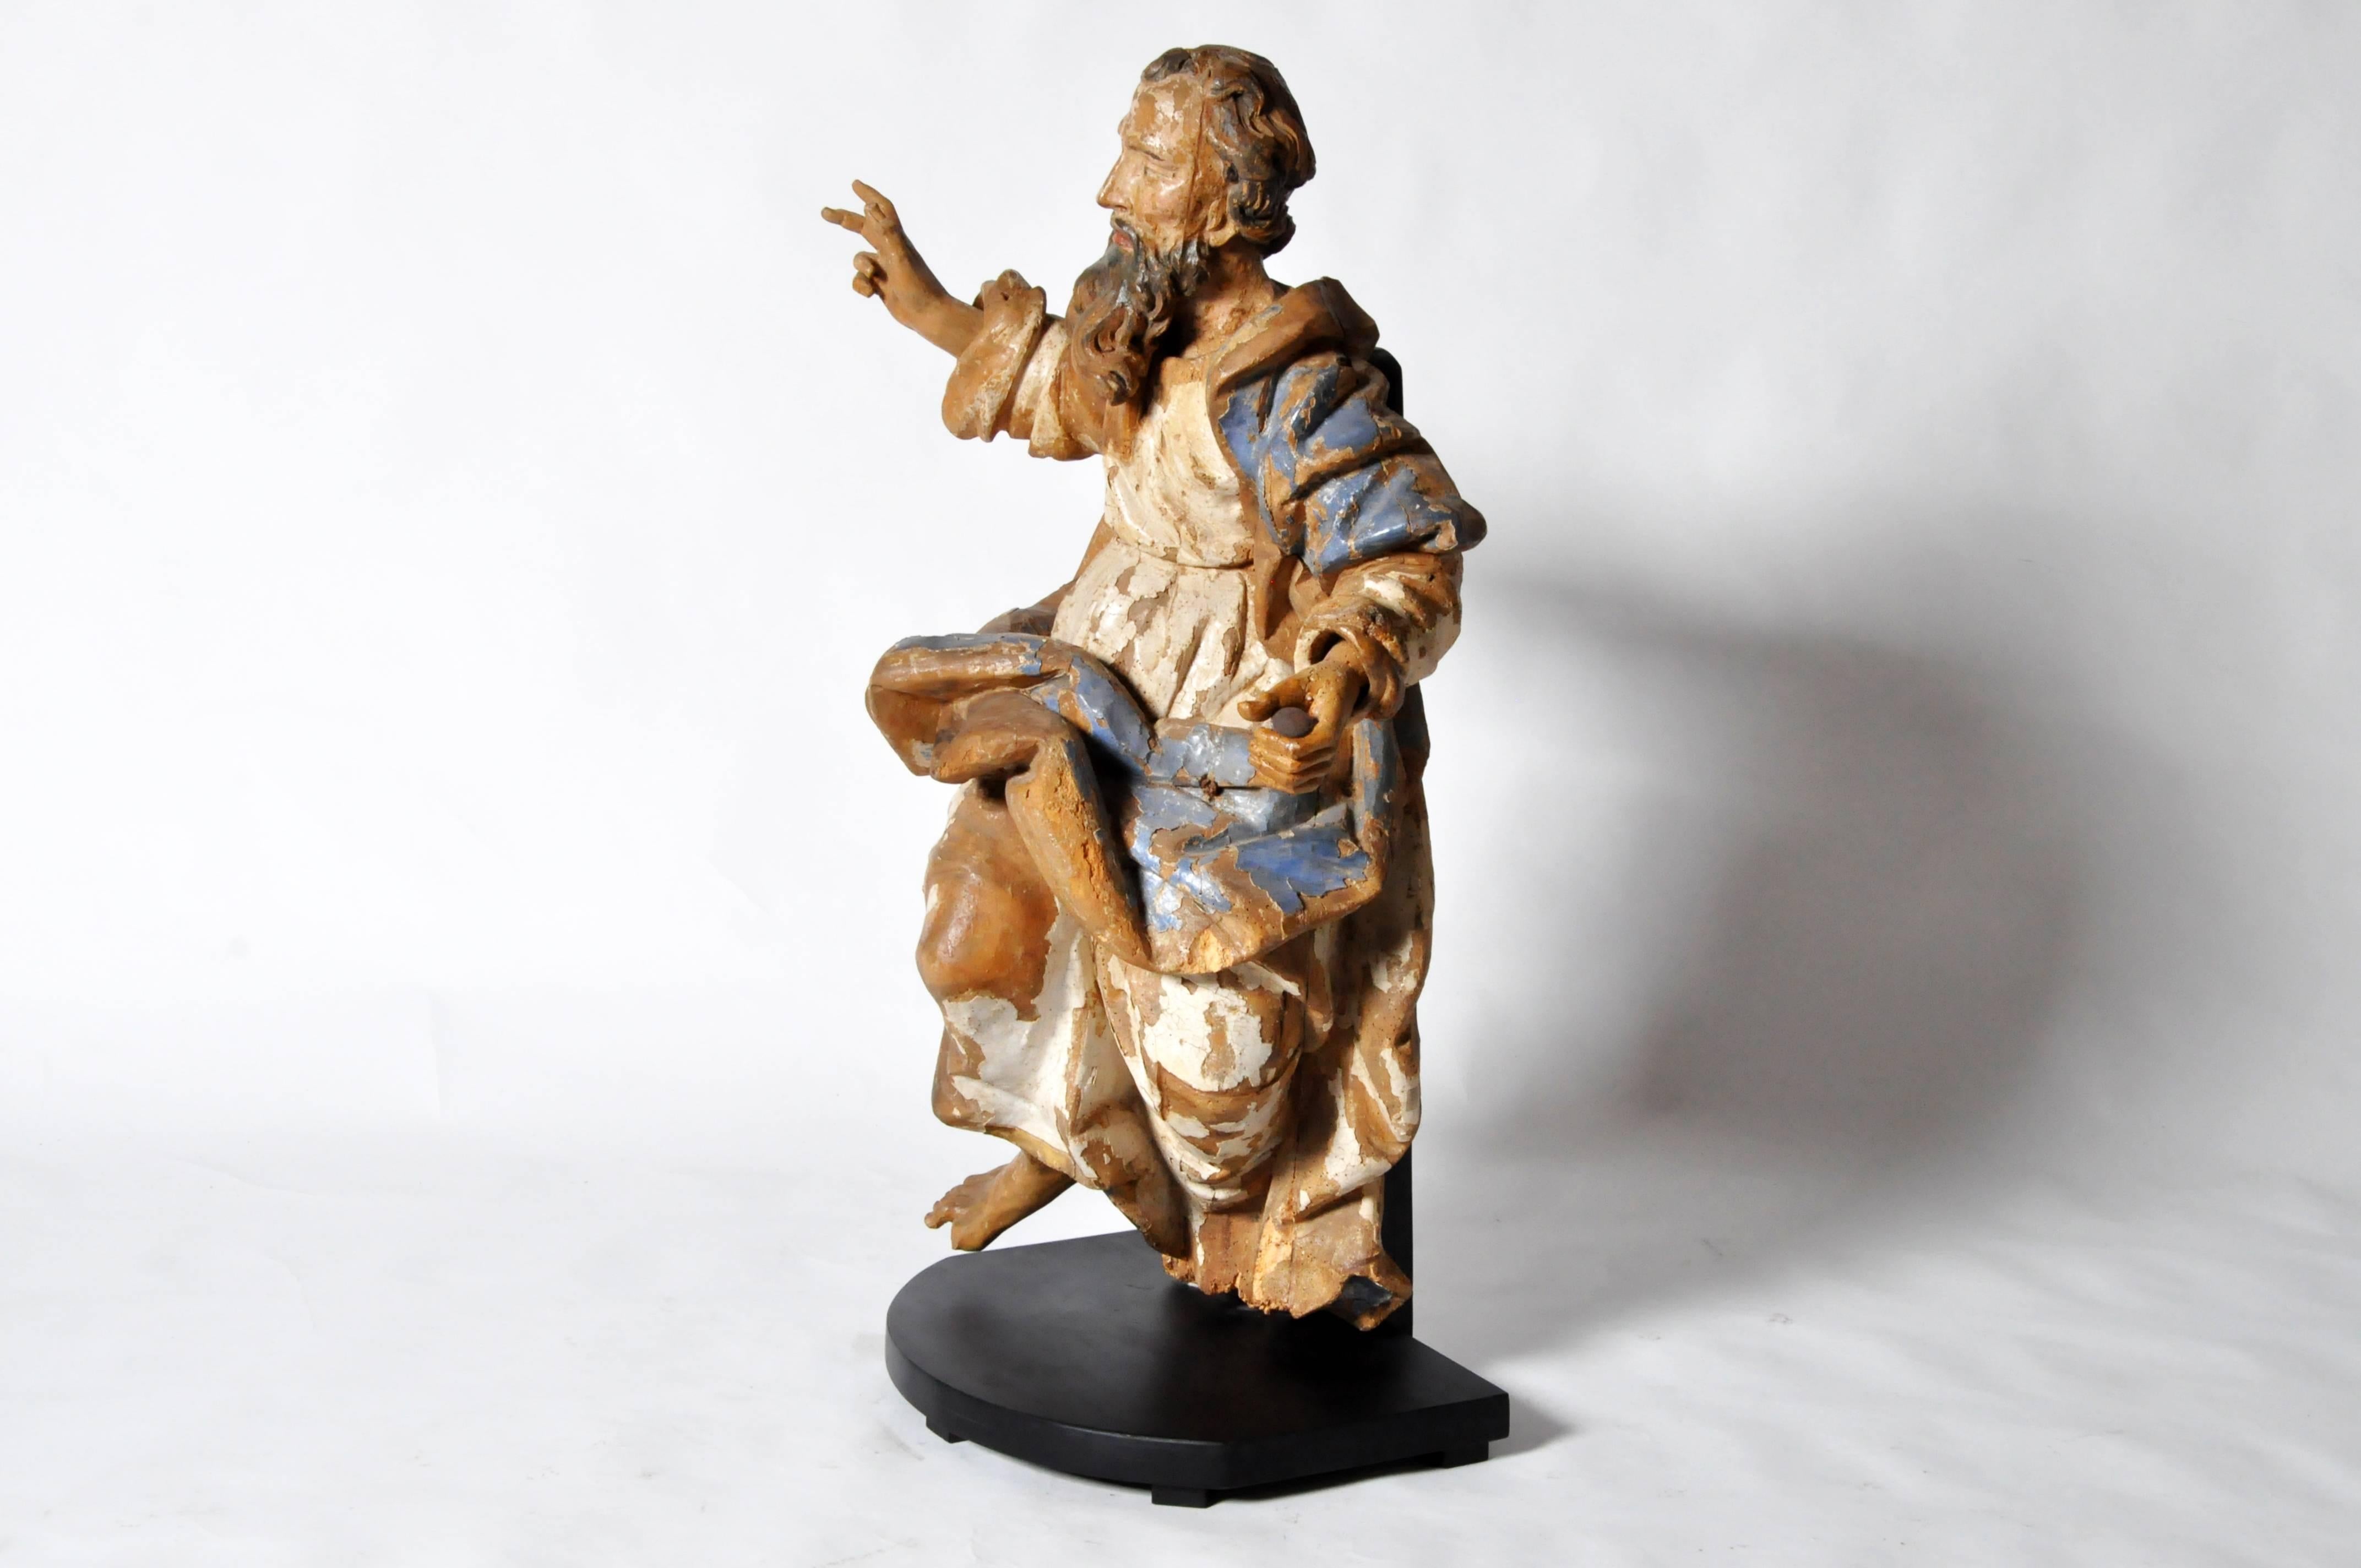 This sculpture of Saint Peter is from Italy and is made from poplar wood, circa 16th century. Saint Peter, according to the New Testament, was one of the 12 Apostles of Jesus Christ, leaders of the early Christian Church. He is also the 